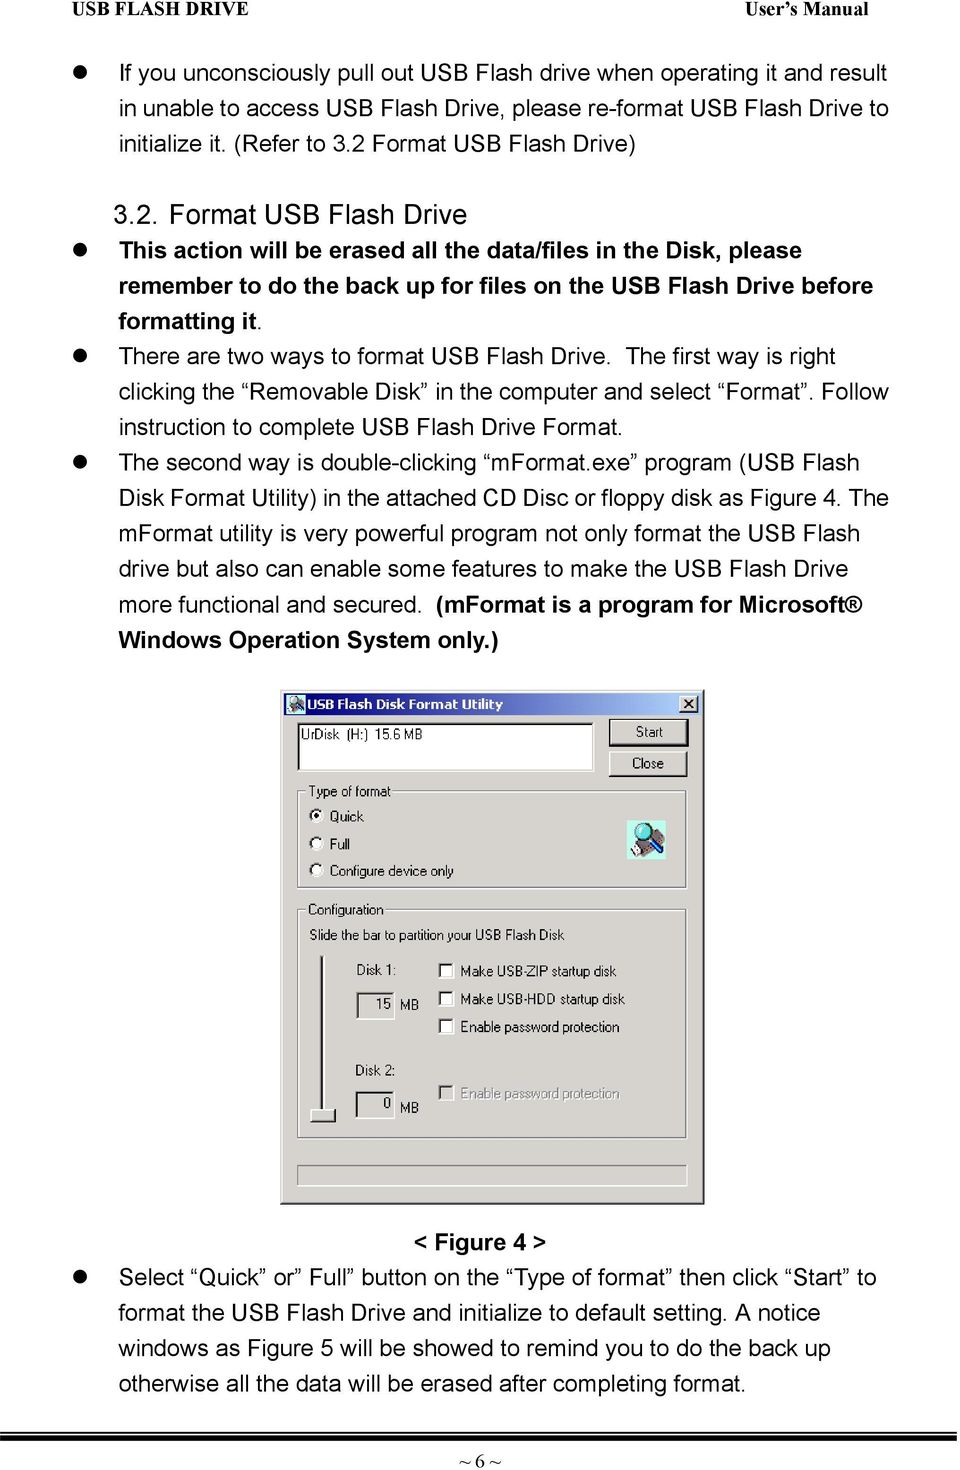 There are two ways to format USB Flash Drive. The first way is right clicking the Removable Disk in the computer and select Format. Follow instruction to complete USB Flash Drive Format.